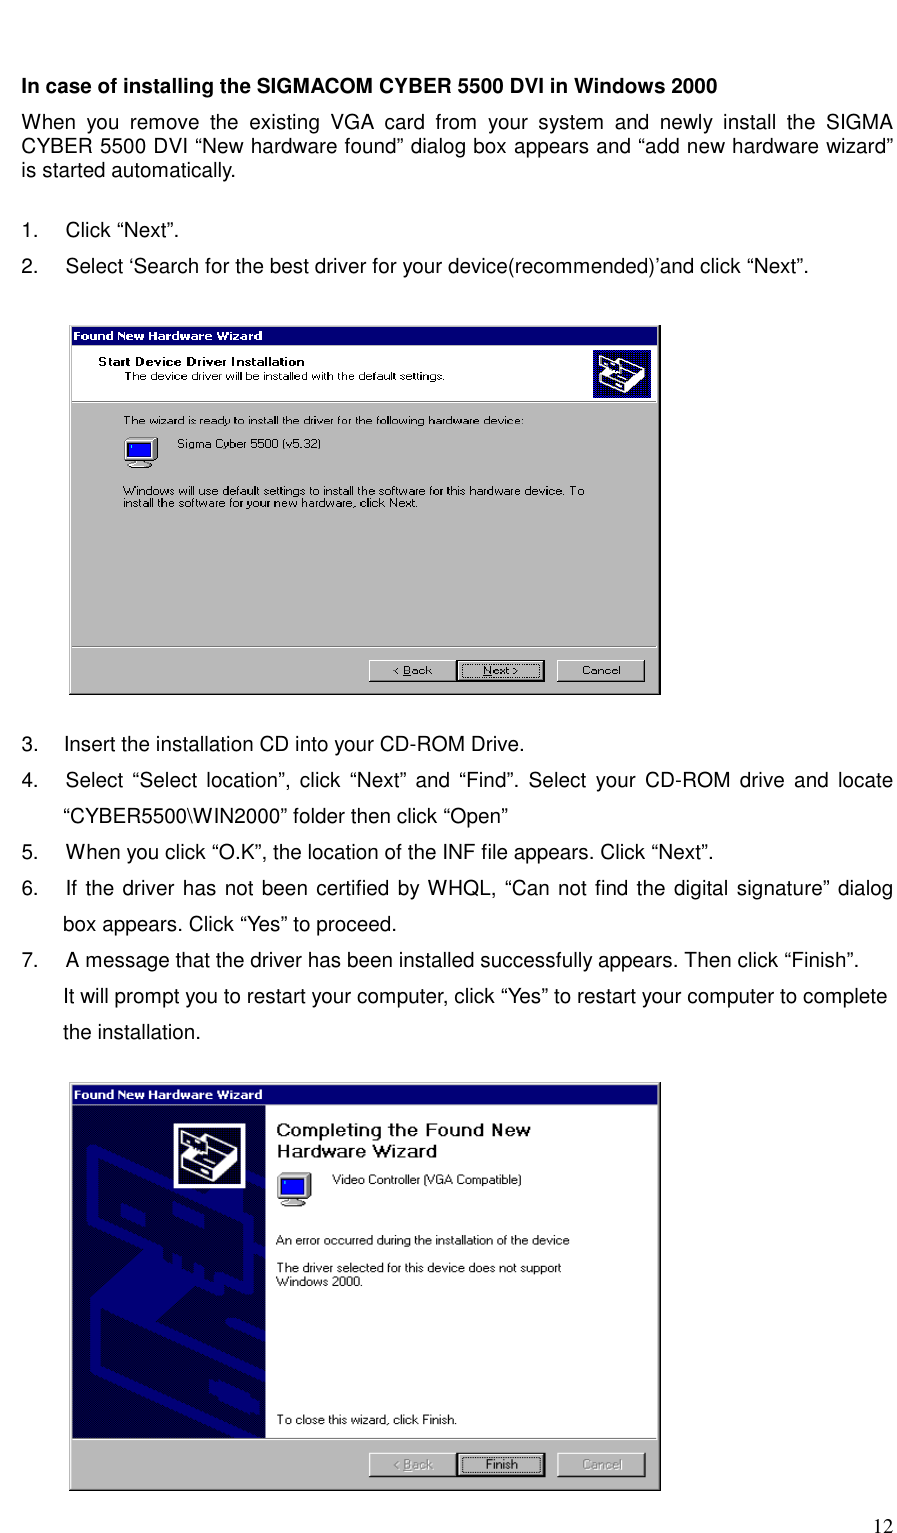     12  In case of installing the SIGMACOM CYBER 5500 DVI in Windows 2000   When you remove the existing VGA card from your system and newly install the SIGMA CYBER 5500 DVI “New hardware found” dialog box appears and “add new hardware wizard” is started automatically.  1.   Click “Next”. 2.     Select ‘Search for the best driver for your device(recommended)’and click “Next”.            3.   Insert the installation CD into your CD-ROM Drive. 4.   Select “Select location”, click “Next” and “Find”. Select your CD-ROM drive and locate “CYBER5500\WIN2000” folder then click “Open” 5.     When you click “O.K”, the location of the INF file appears. Click “Next”.   6.   If the driver has not been certified by WHQL, “Can not find the digital signature” dialog box appears. Click “Yes” to proceed.   7.     A message that the driver has been installed successfully appears. Then click “Finish”. It will prompt you to restart your computer, click “Yes” to restart your computer to complete   the installation.           